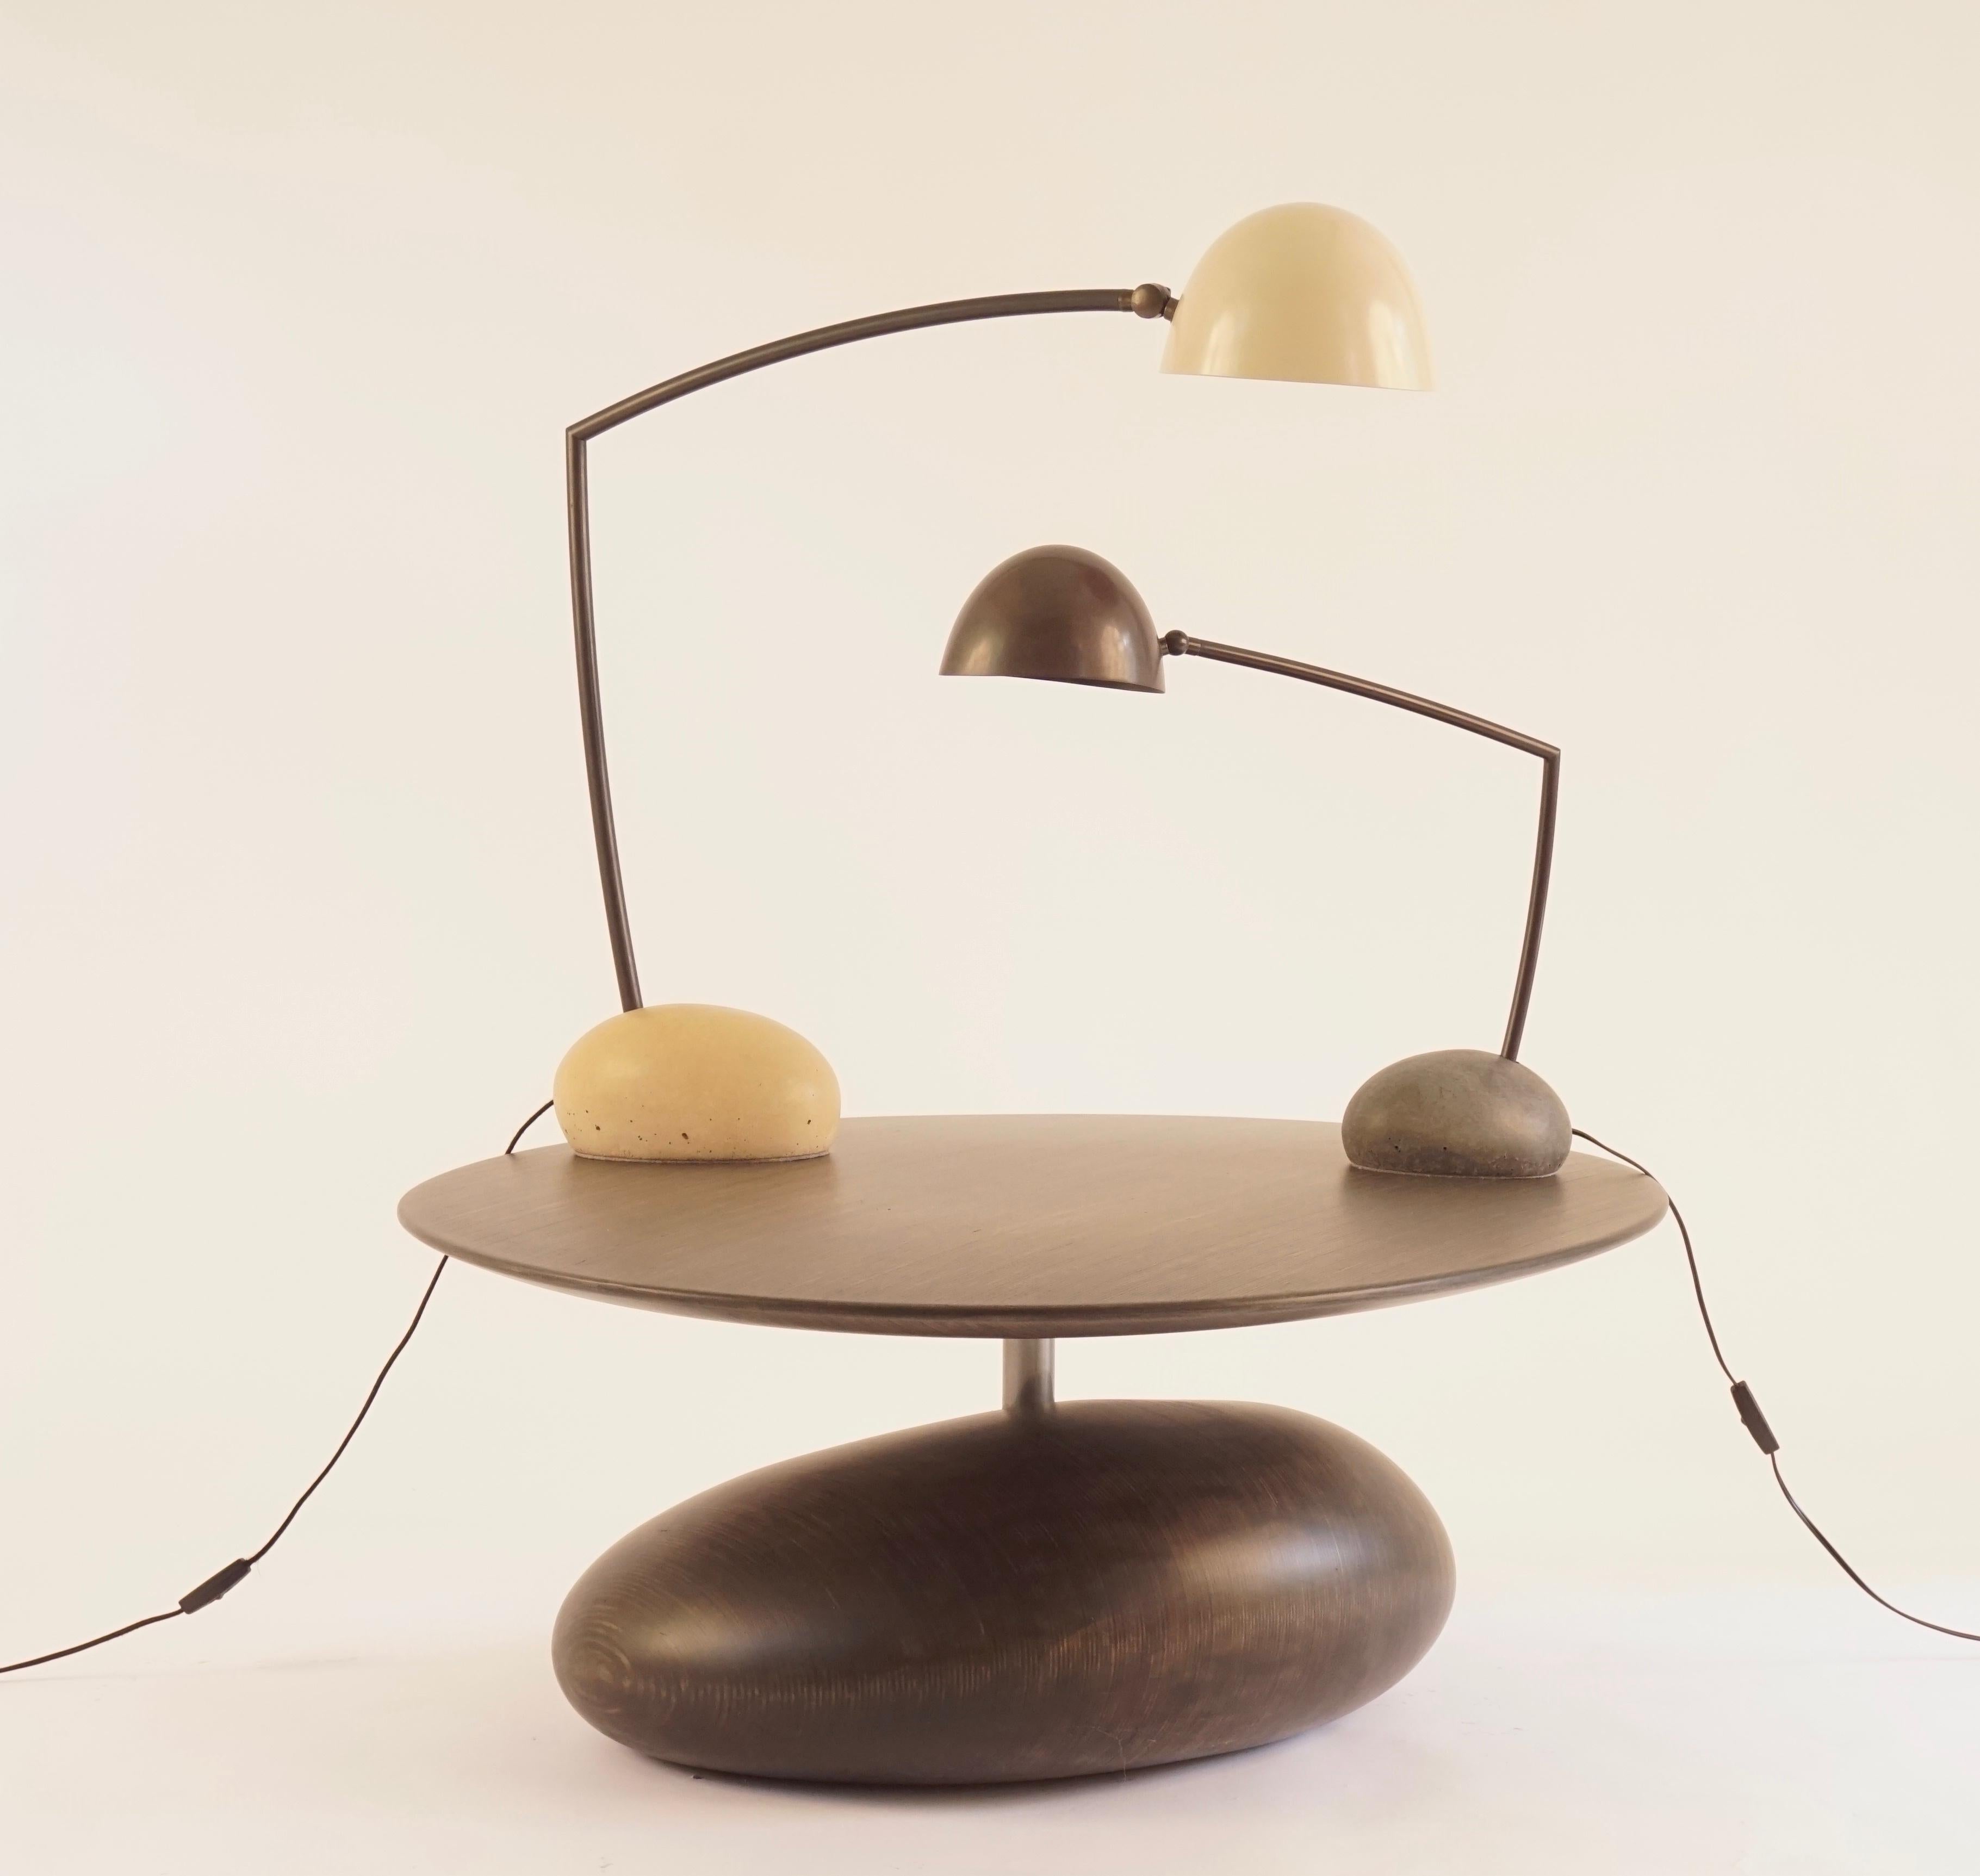 Skye Desk Lamp Small, with Spun Bronze Shade and Stone Shaped Cement Base 1